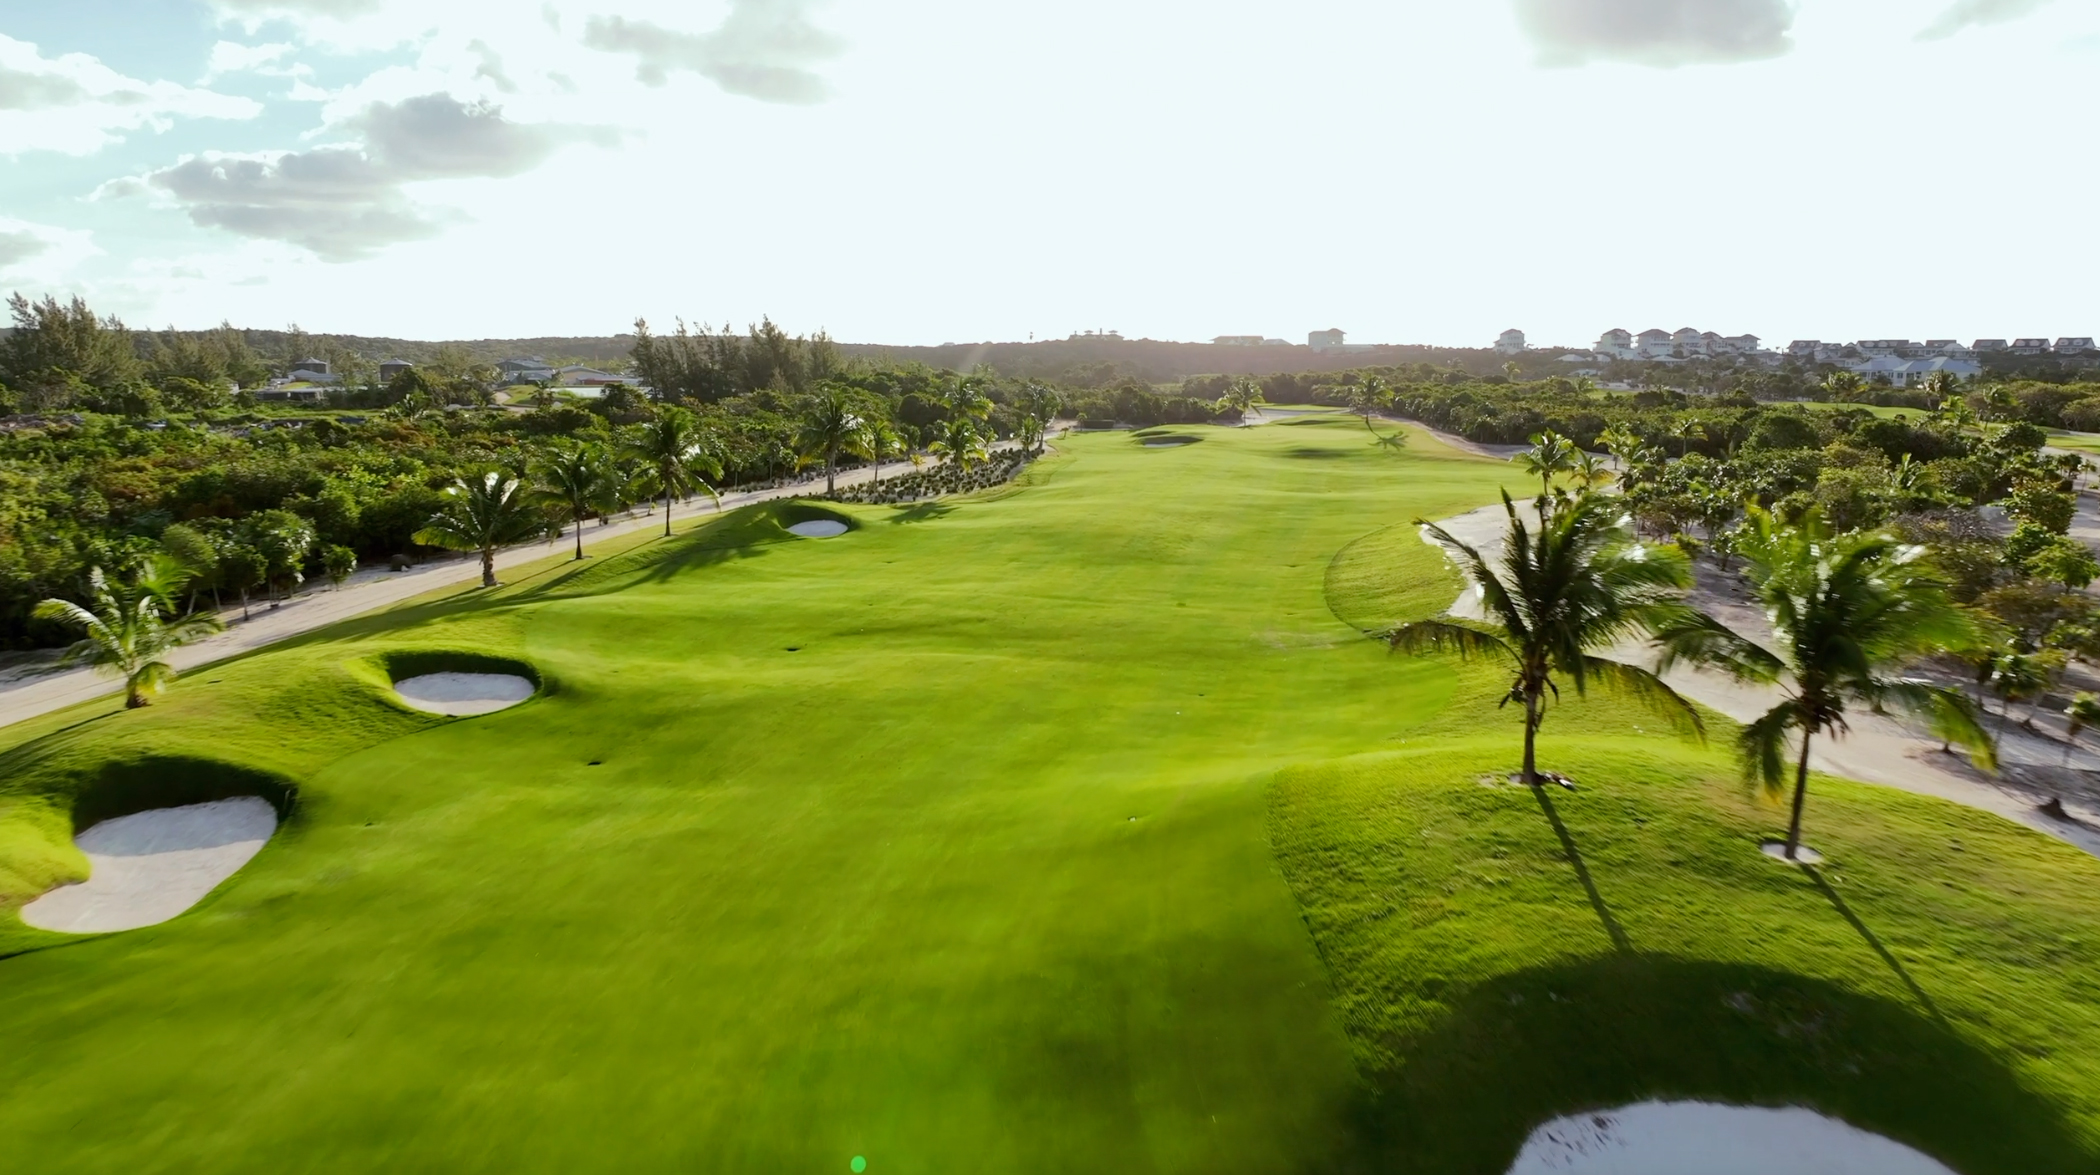 Aerial shot of Hole 13 from The Abaco Club golf course